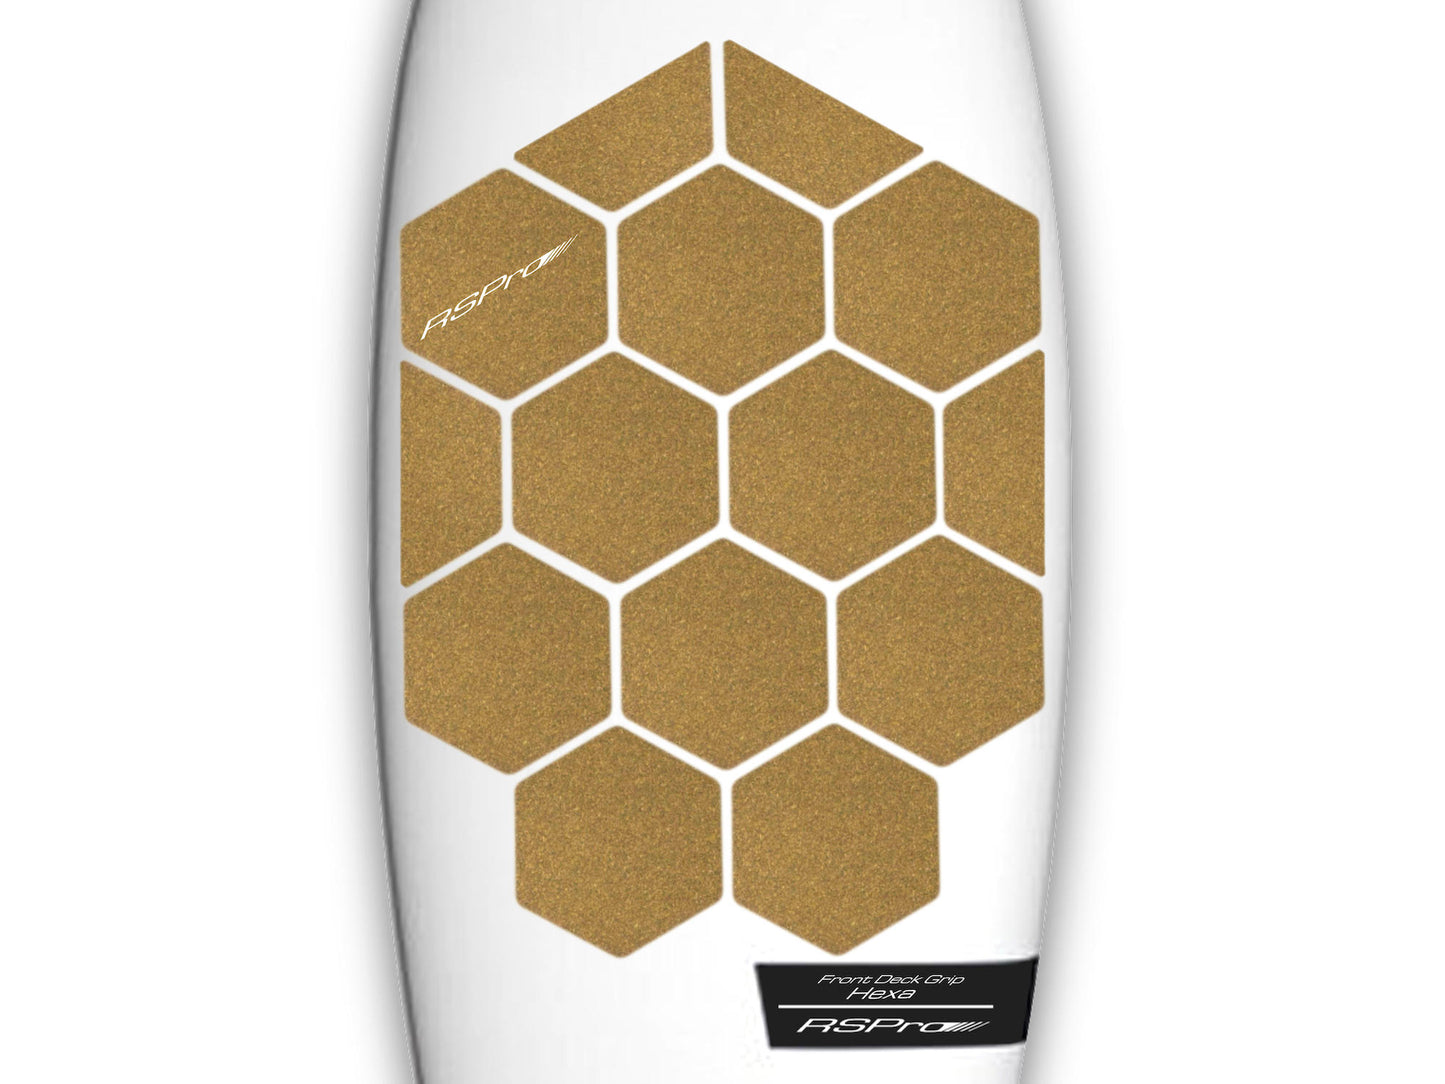 RSPro cork Hexa traction for surfboards - eco-friendly wax alternative.